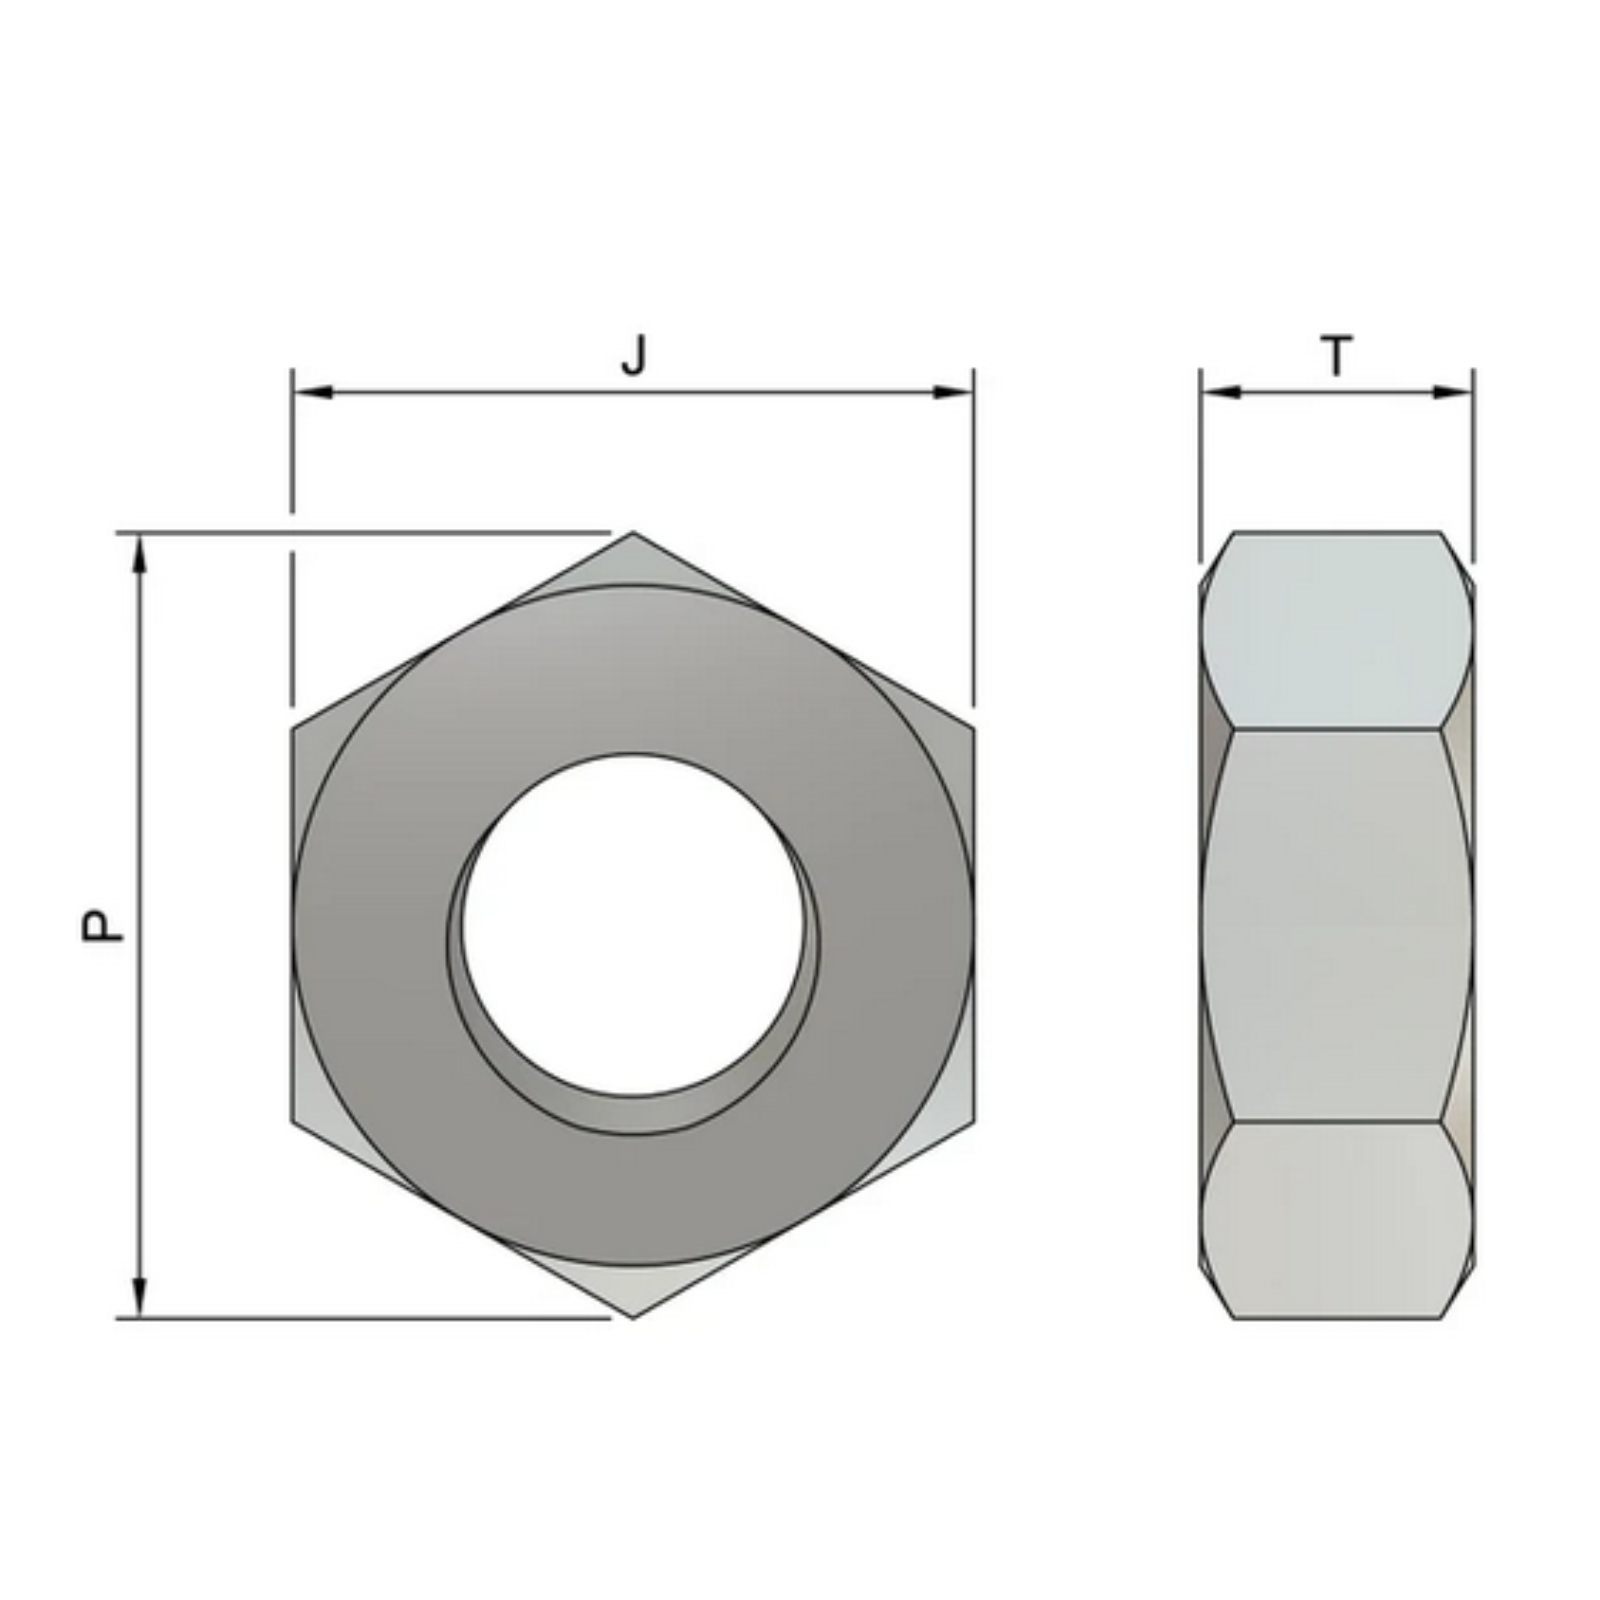 M5 Hexagon Nuts (DIN 934) - Stainless Steel (A4)